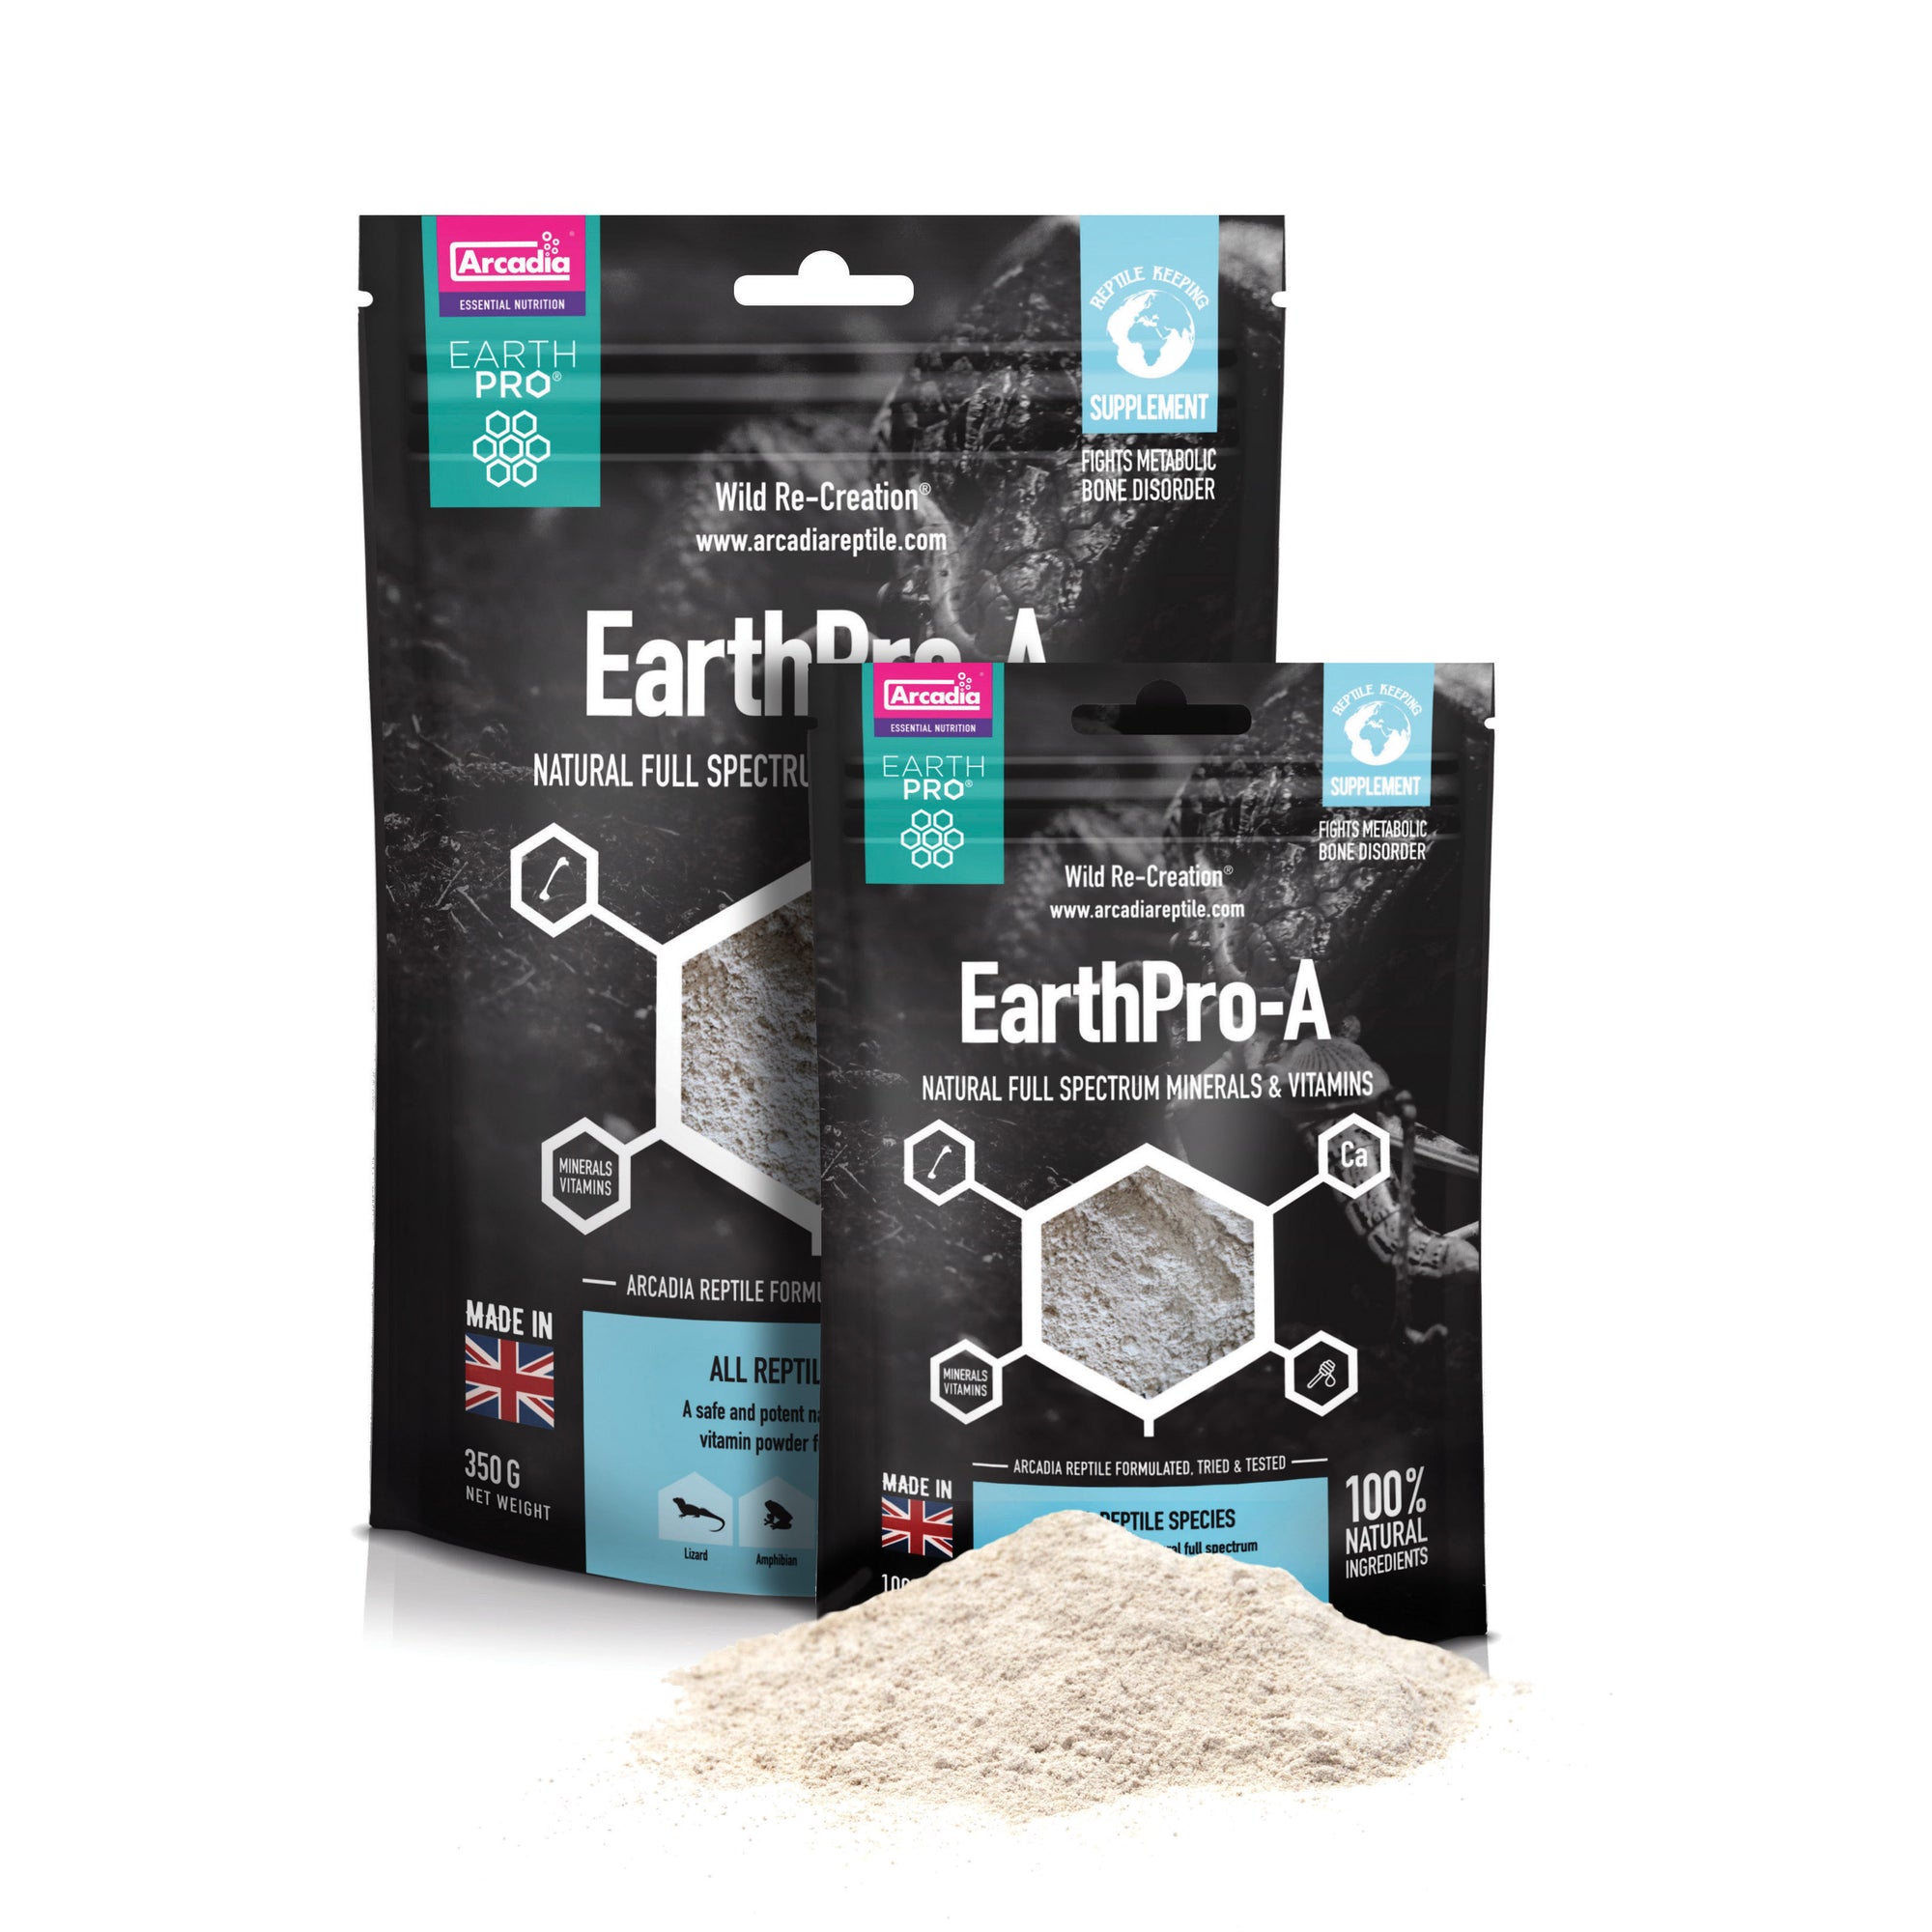 Arcadia Reptile EarthPro-A pouches with powder